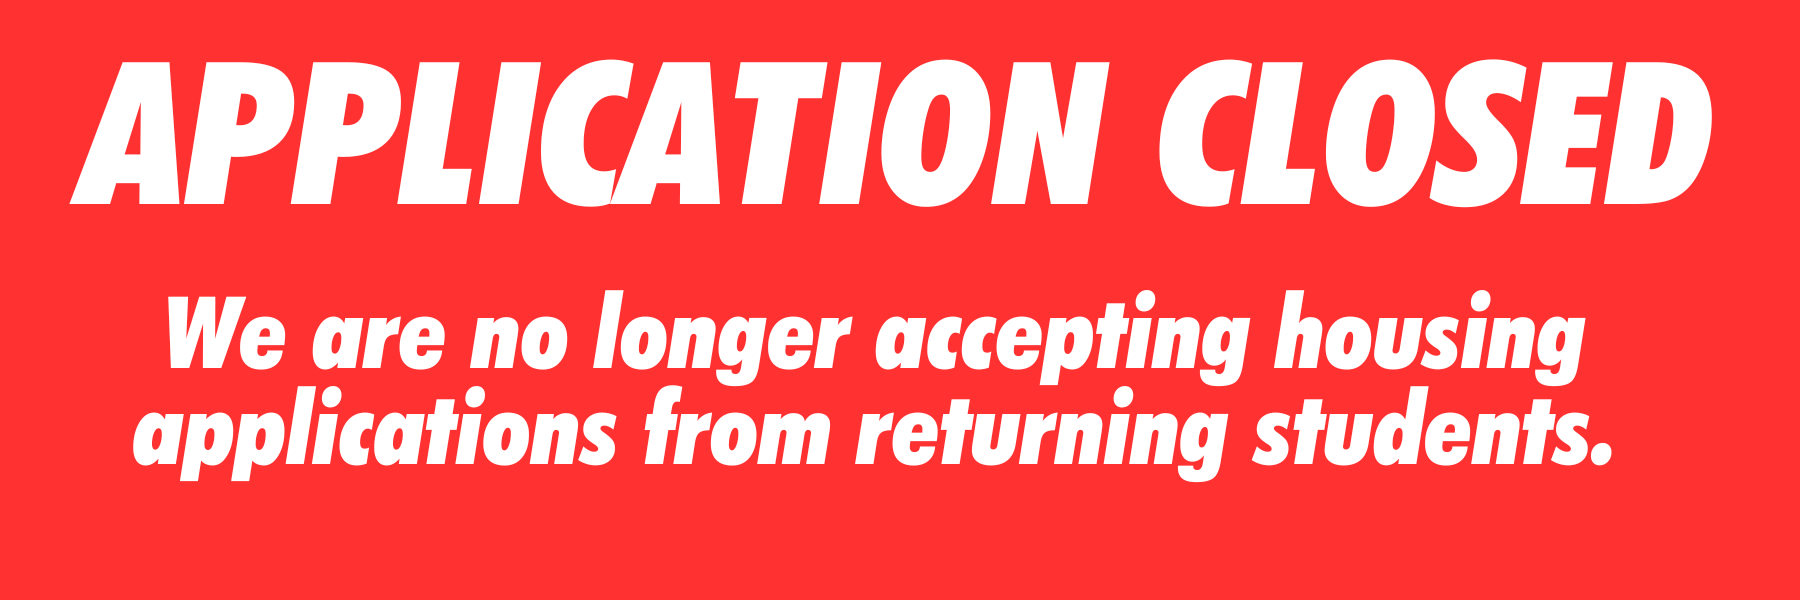 Application closed. We are no longer accepting housing applications from returning students.